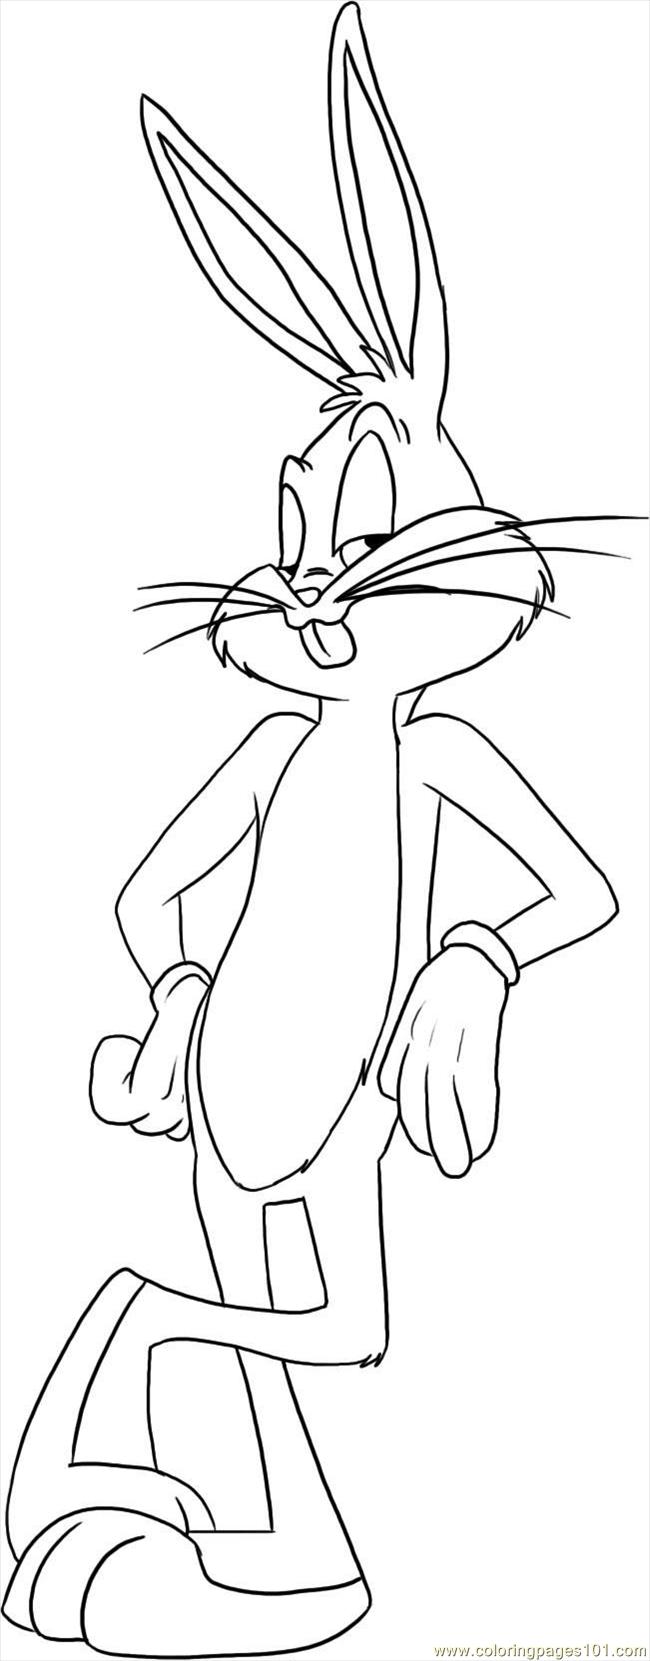 Coloring Pages Bugs Bunny Step 5 (Cartoons > Bugs Bunny ...